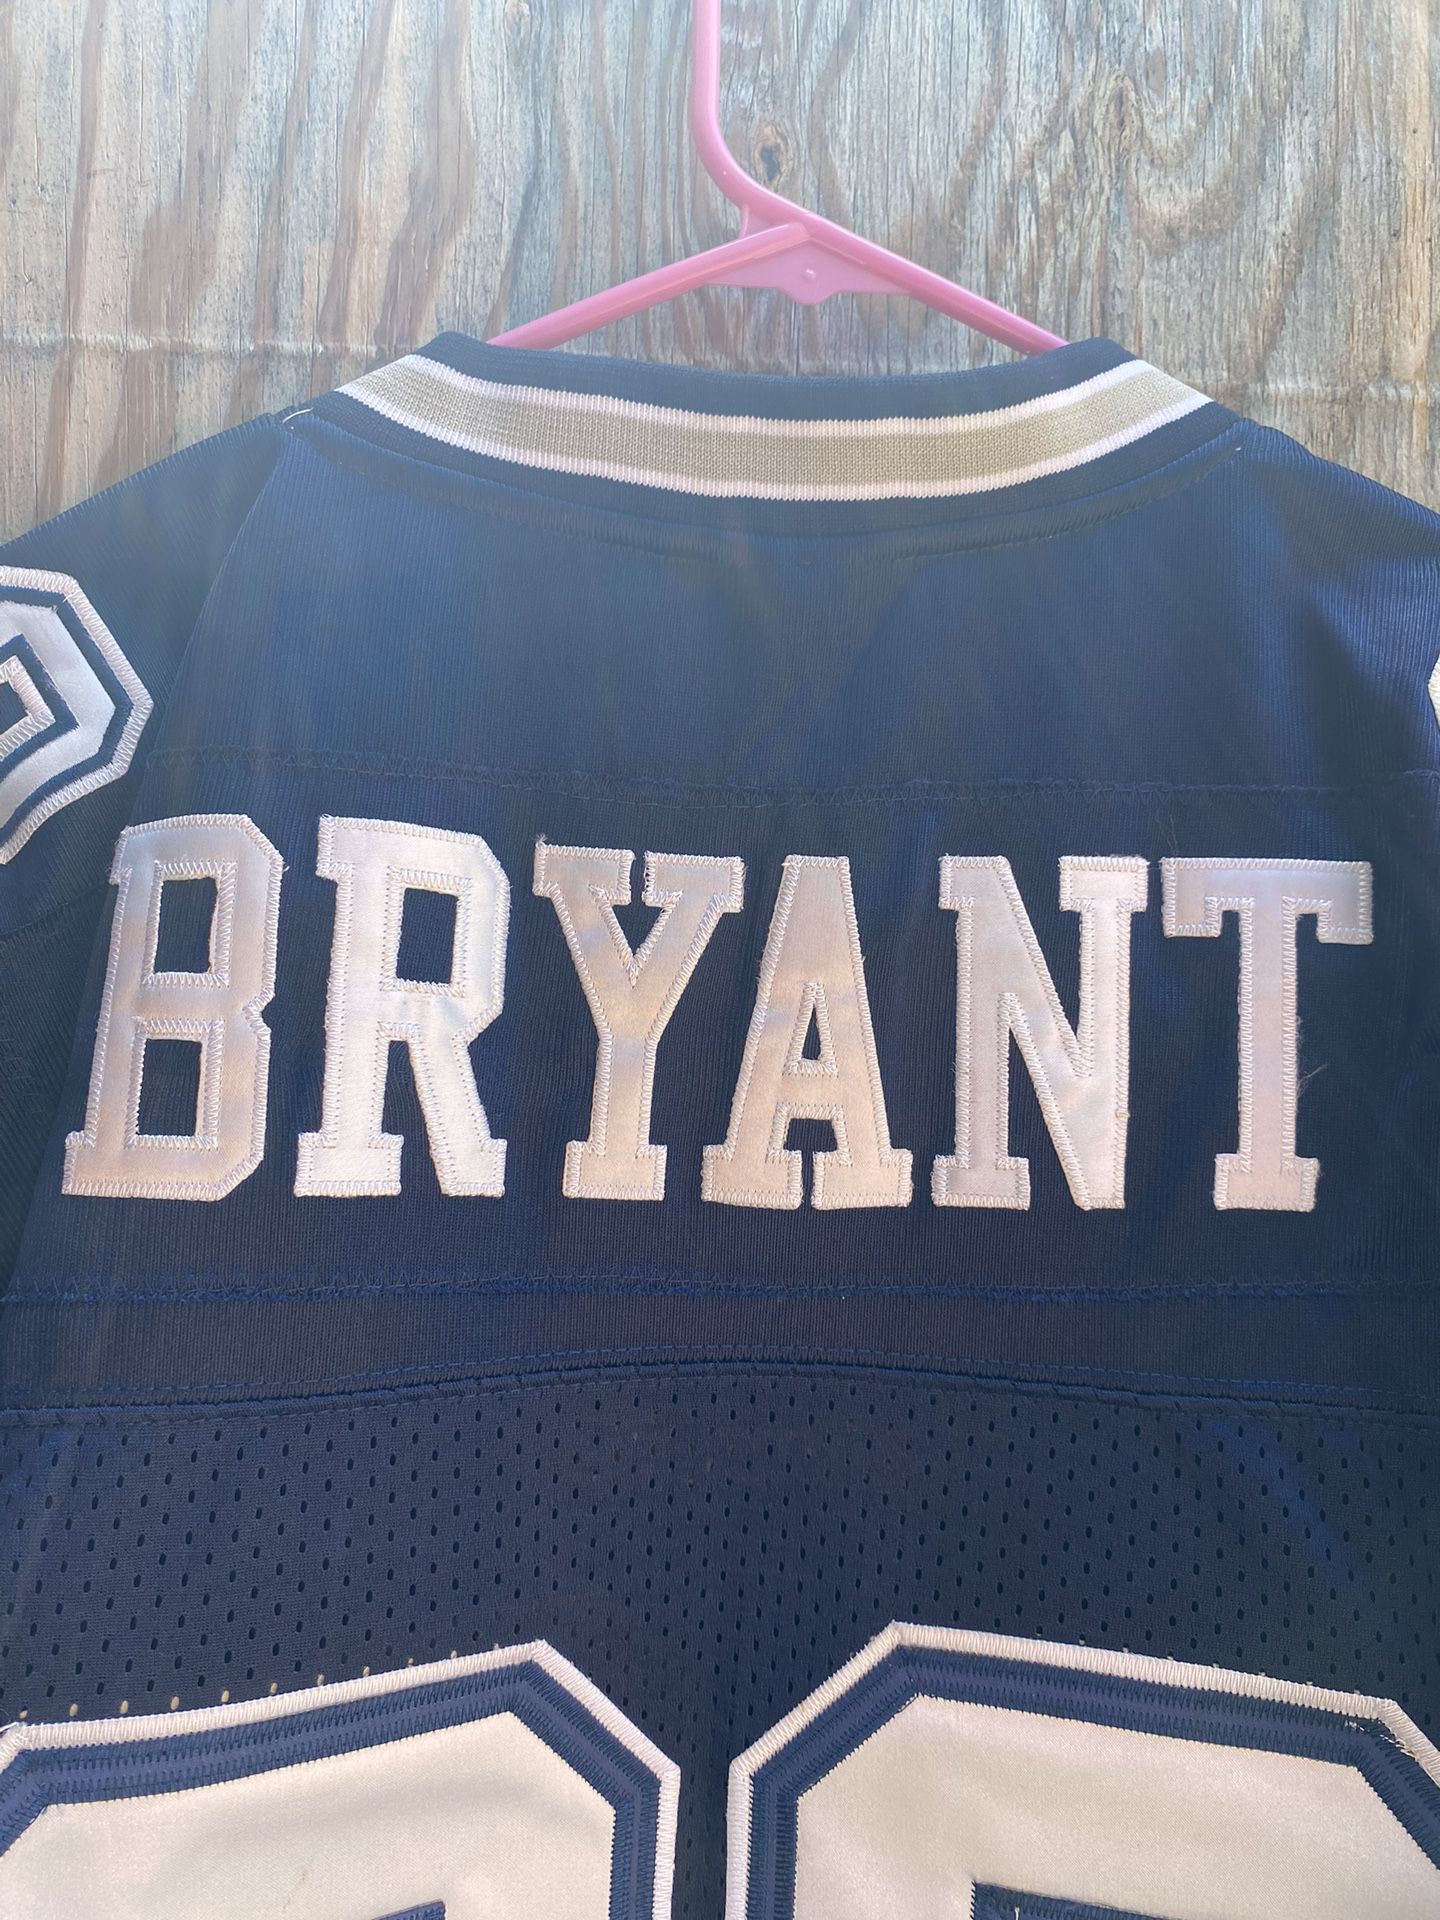 Dallas Cowboys Dez Bryant Jersey for Sale in Midland, TX - OfferUp